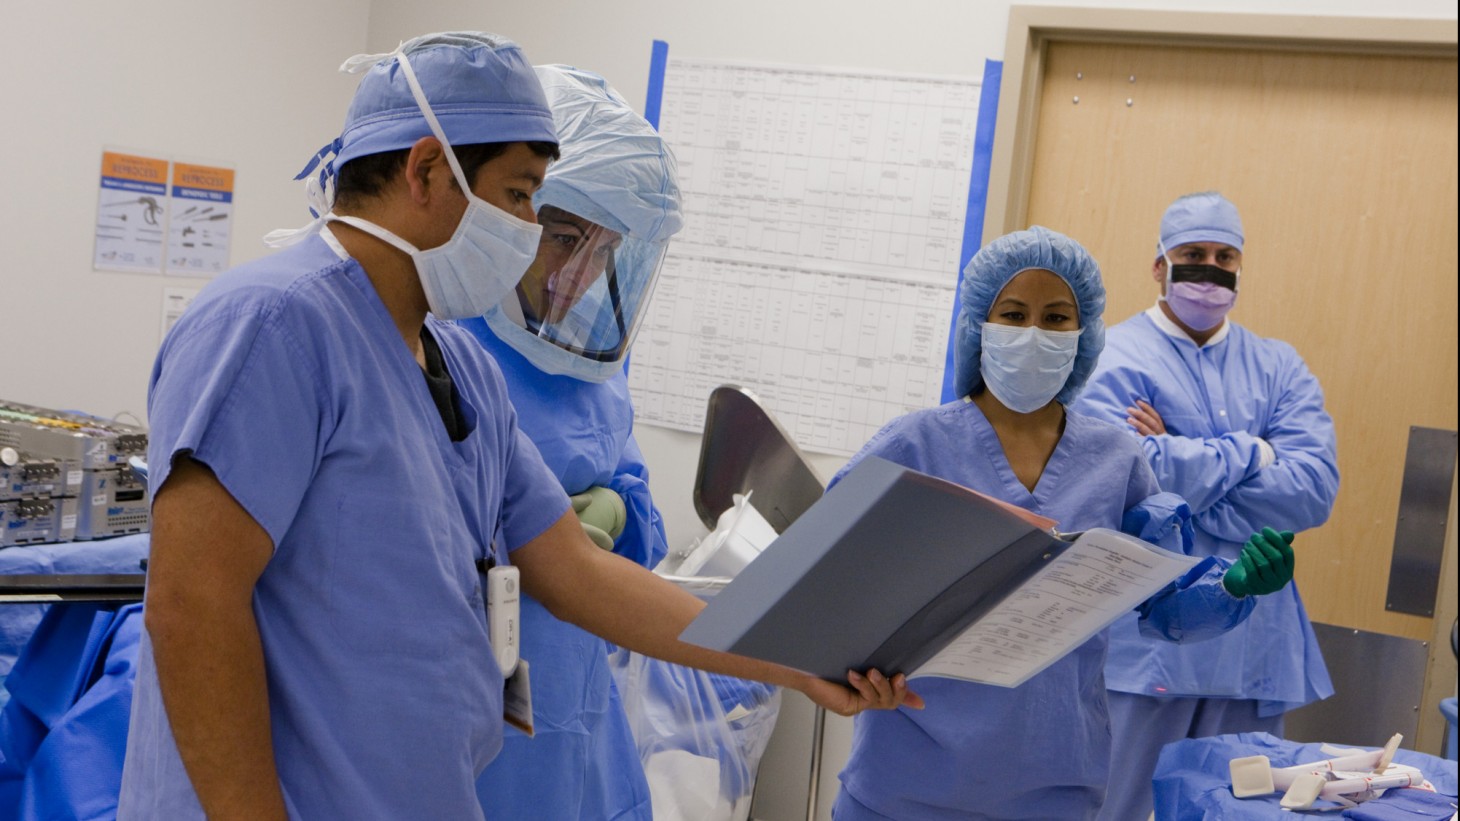 A team of surgeons gets ready to operate 